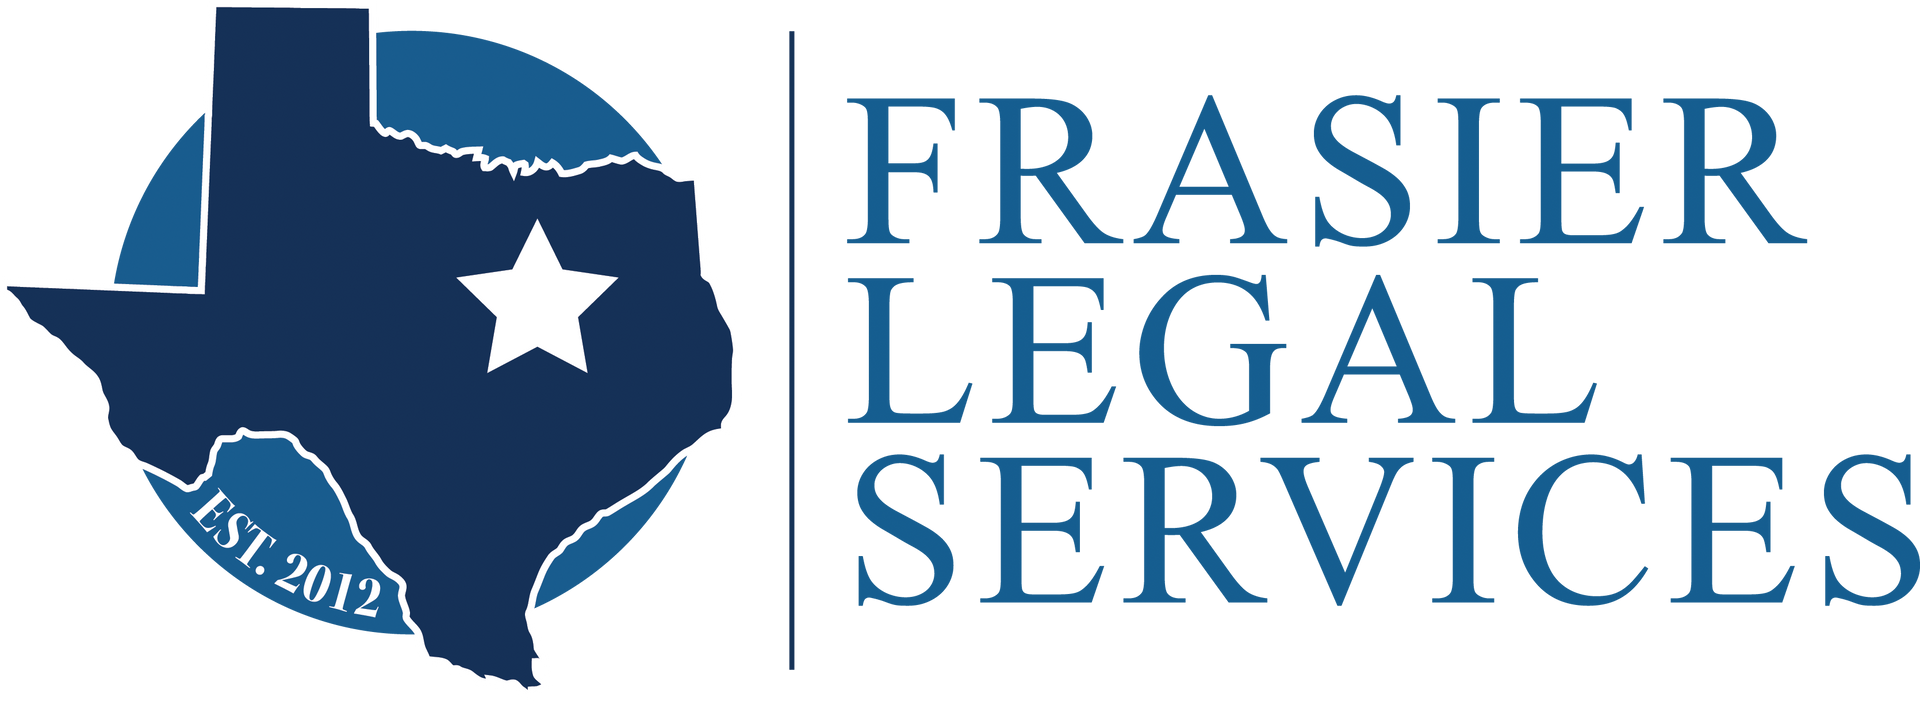 The logo for frasier legal services shows a map of texas